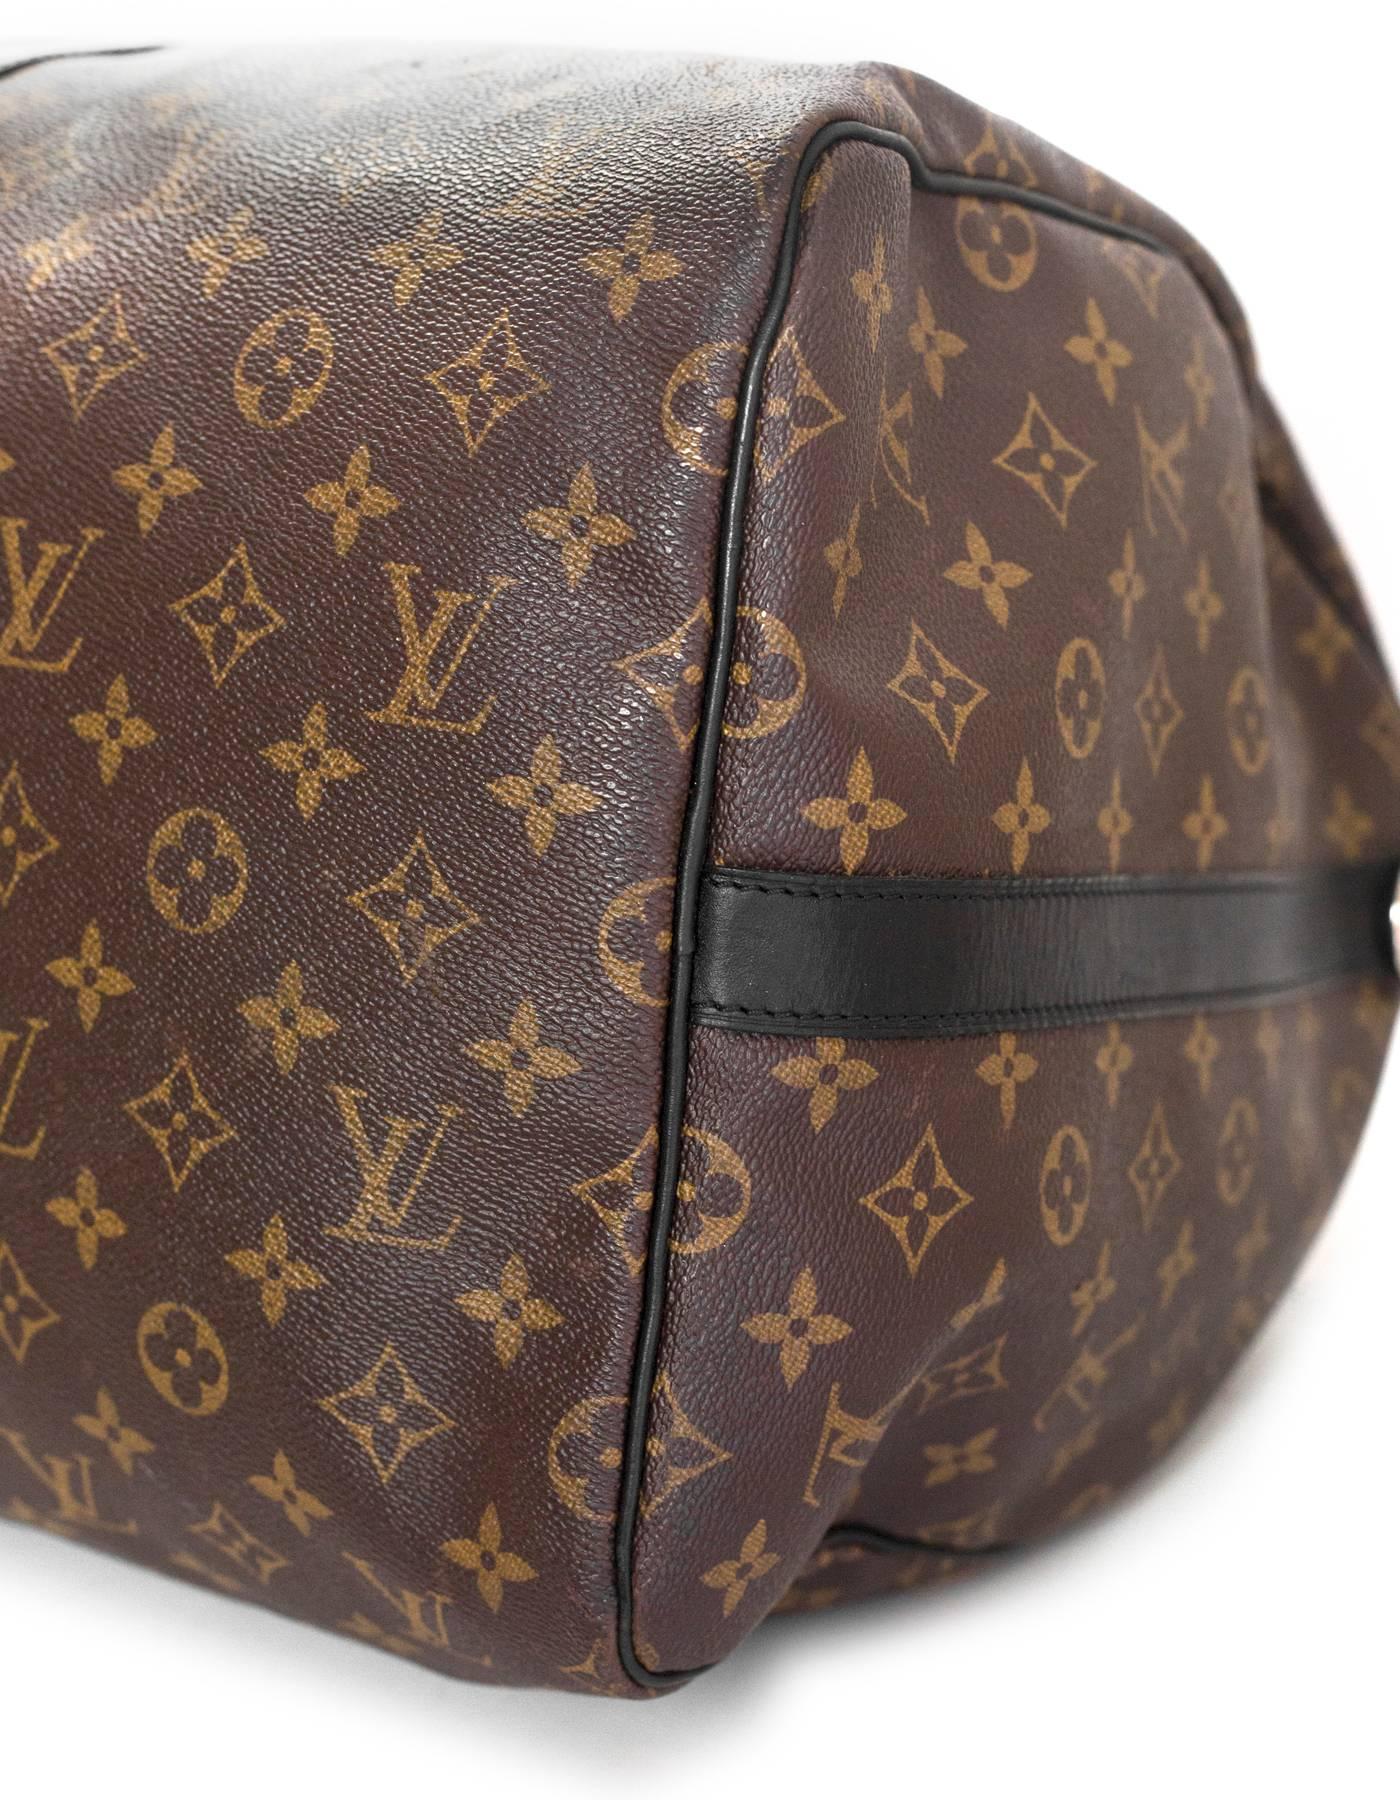 Louis Vuitton Monogram Macassar Keepall Bandouliere 55 Duffle Travel Bag In Excellent Condition In New York, NY